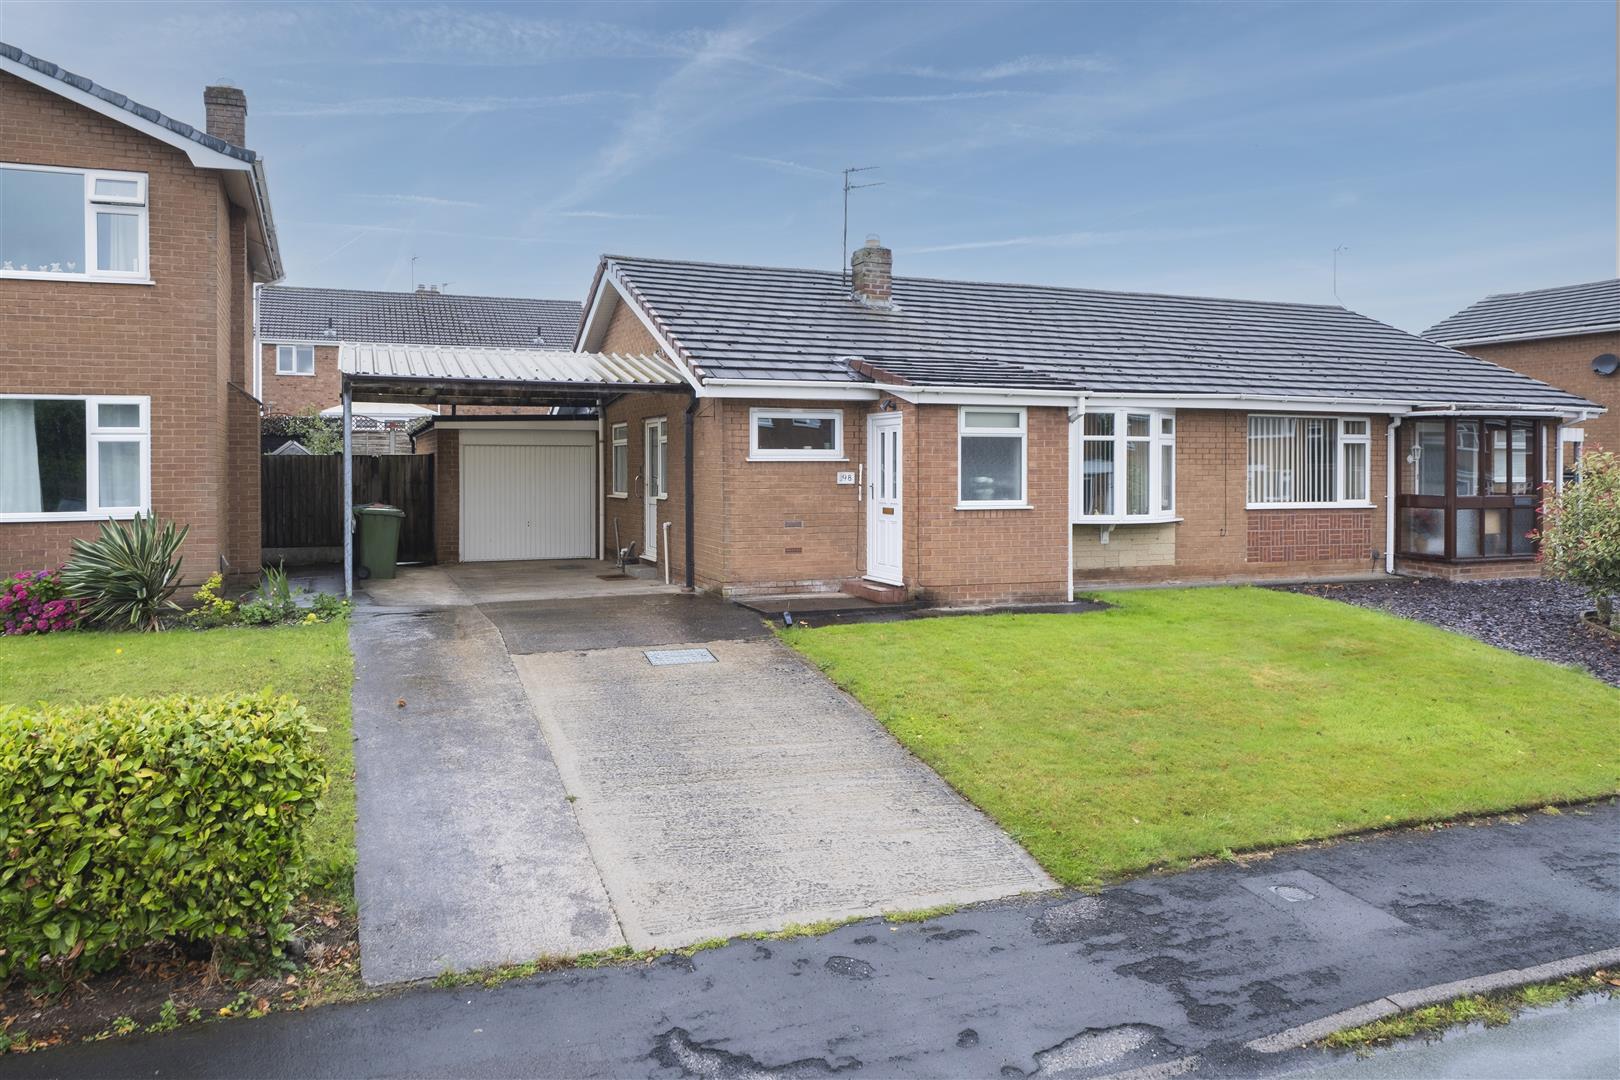 2 bedroom  Bungalow for Sale in Northwich